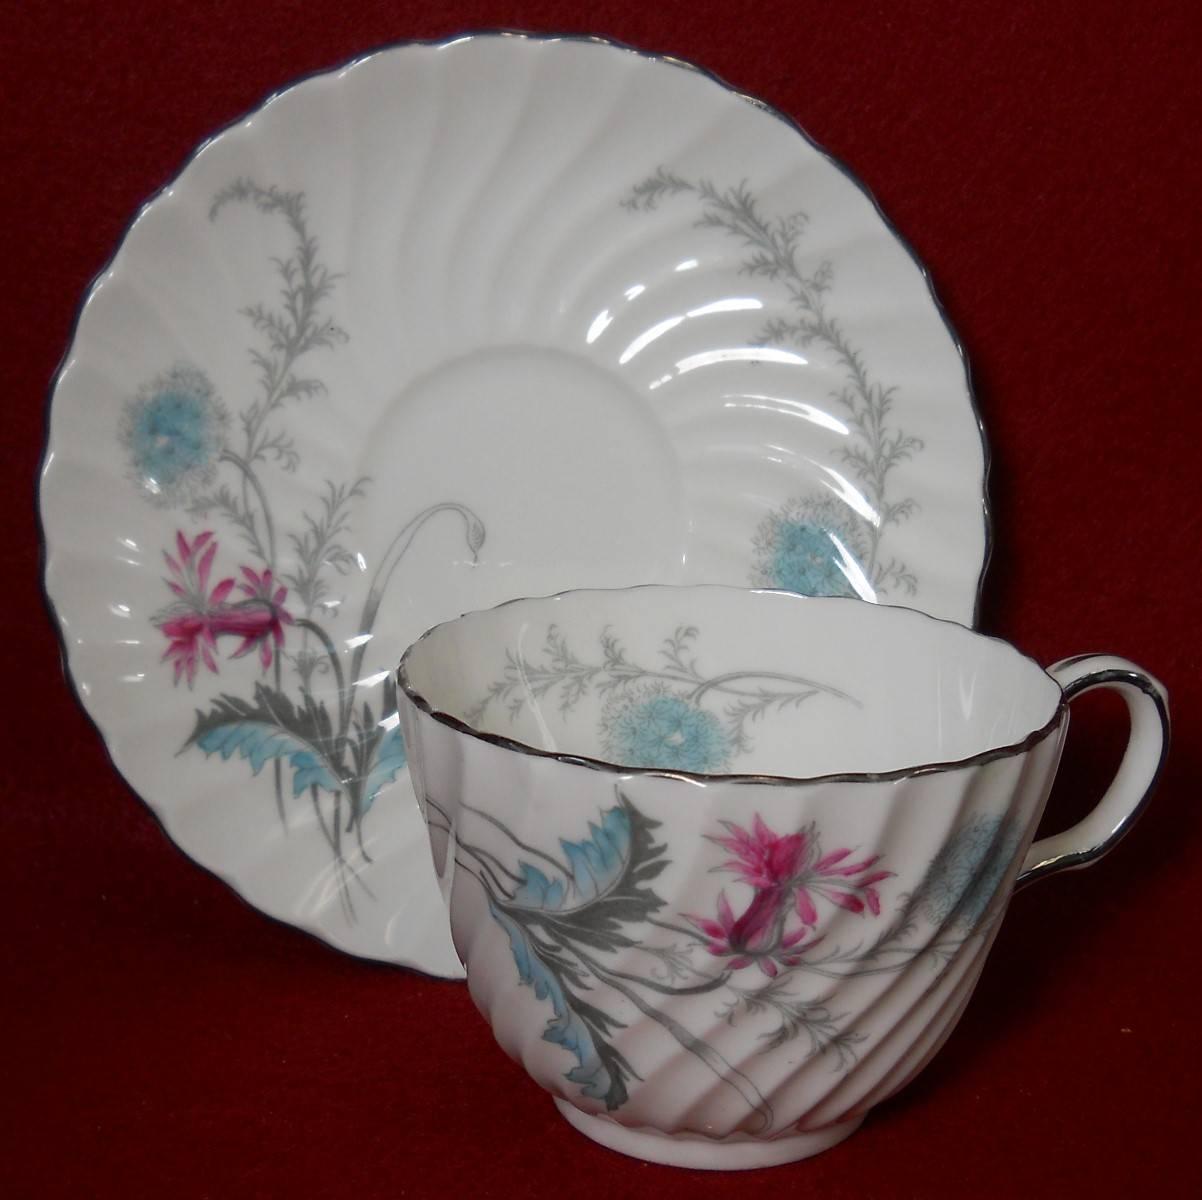 Aynsley China wayside pattern 55-piece set service for twelve (12)

in great condition free from chips, cracks, break, stain, or discoloration and with only a minimum of use.

Pattern 8183. 

Pink and turquoise flowers.

Swirled